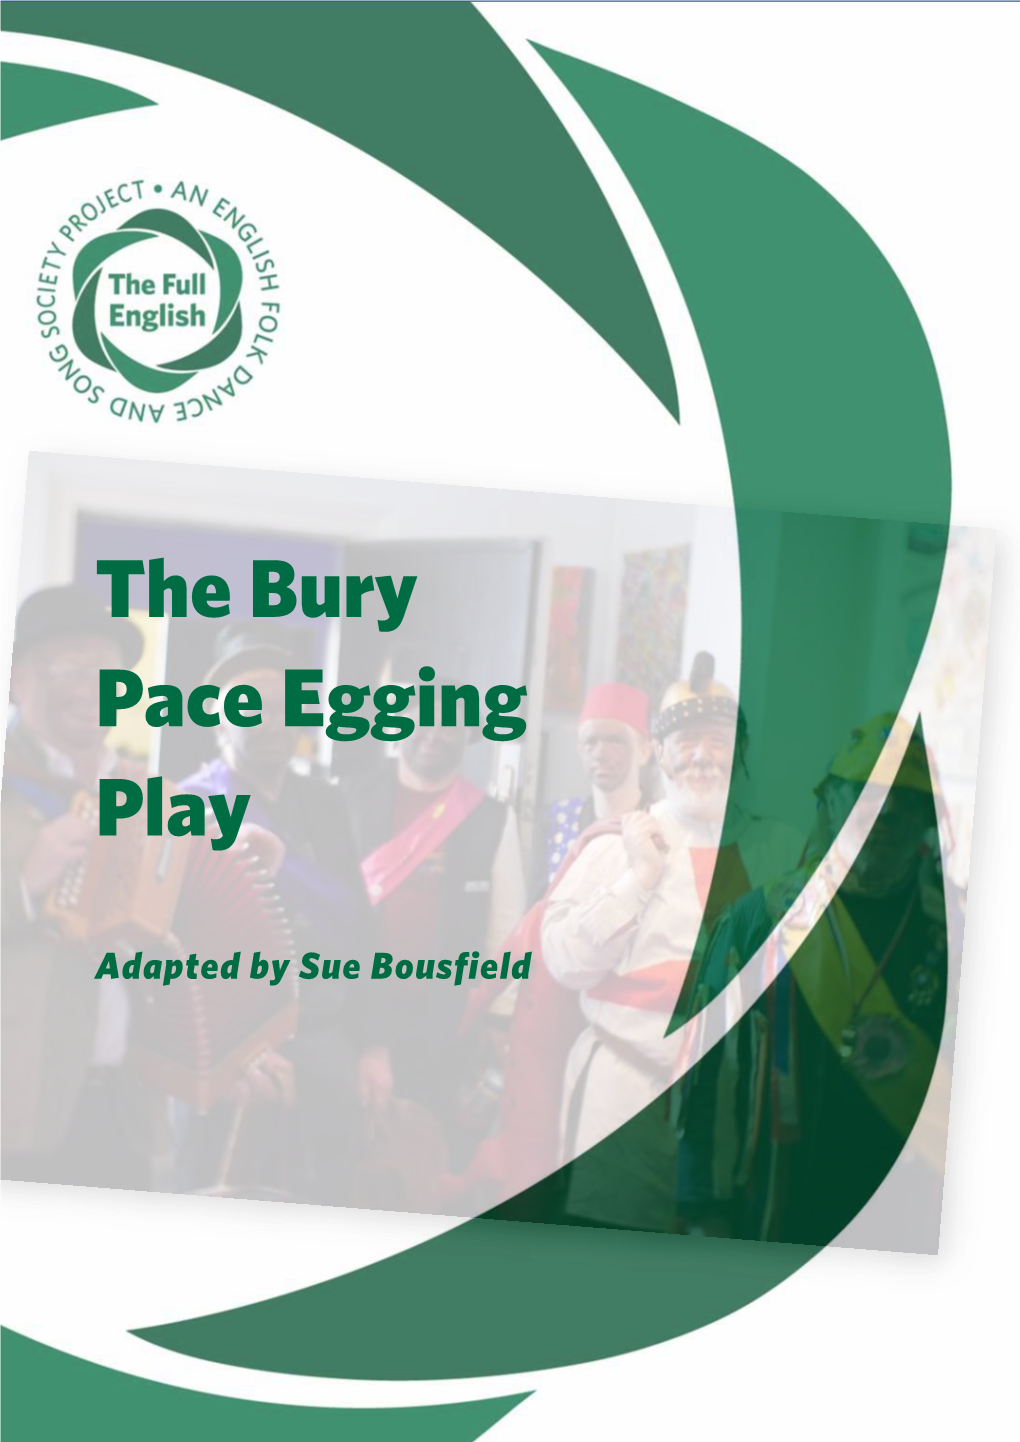 The Bury Pace Egging Play